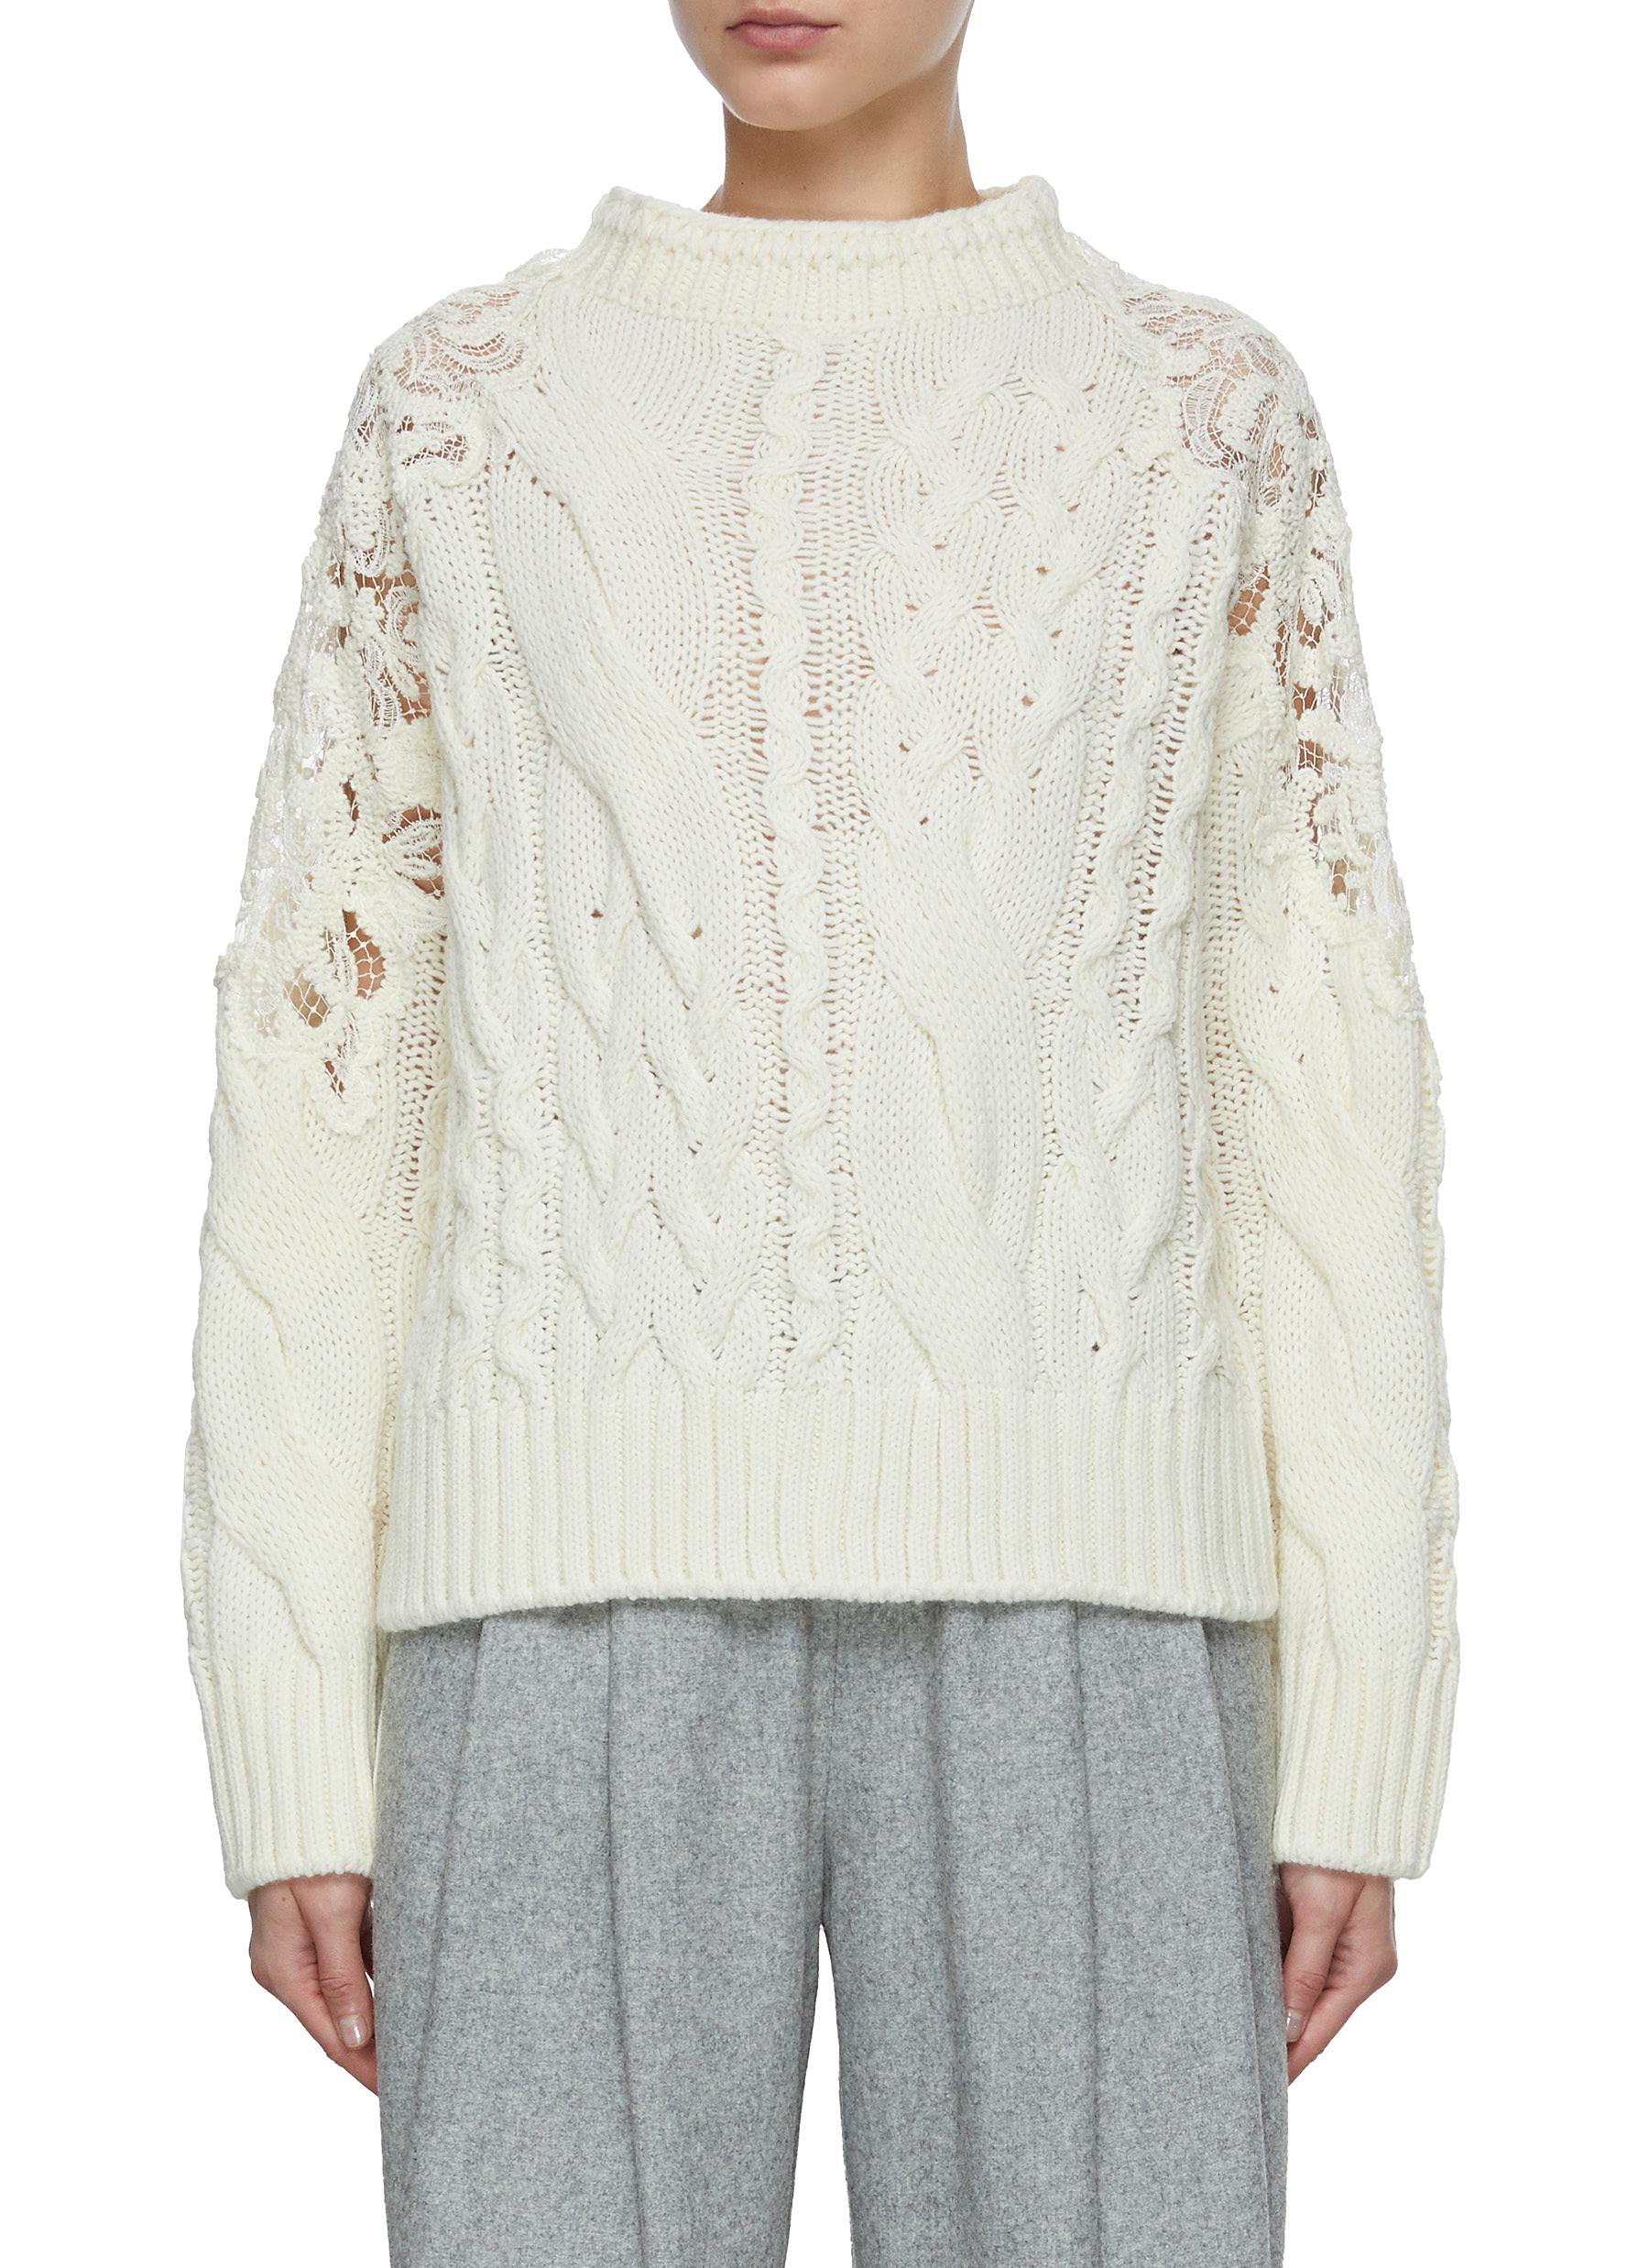 Lace Detail Cable Knit Sweater